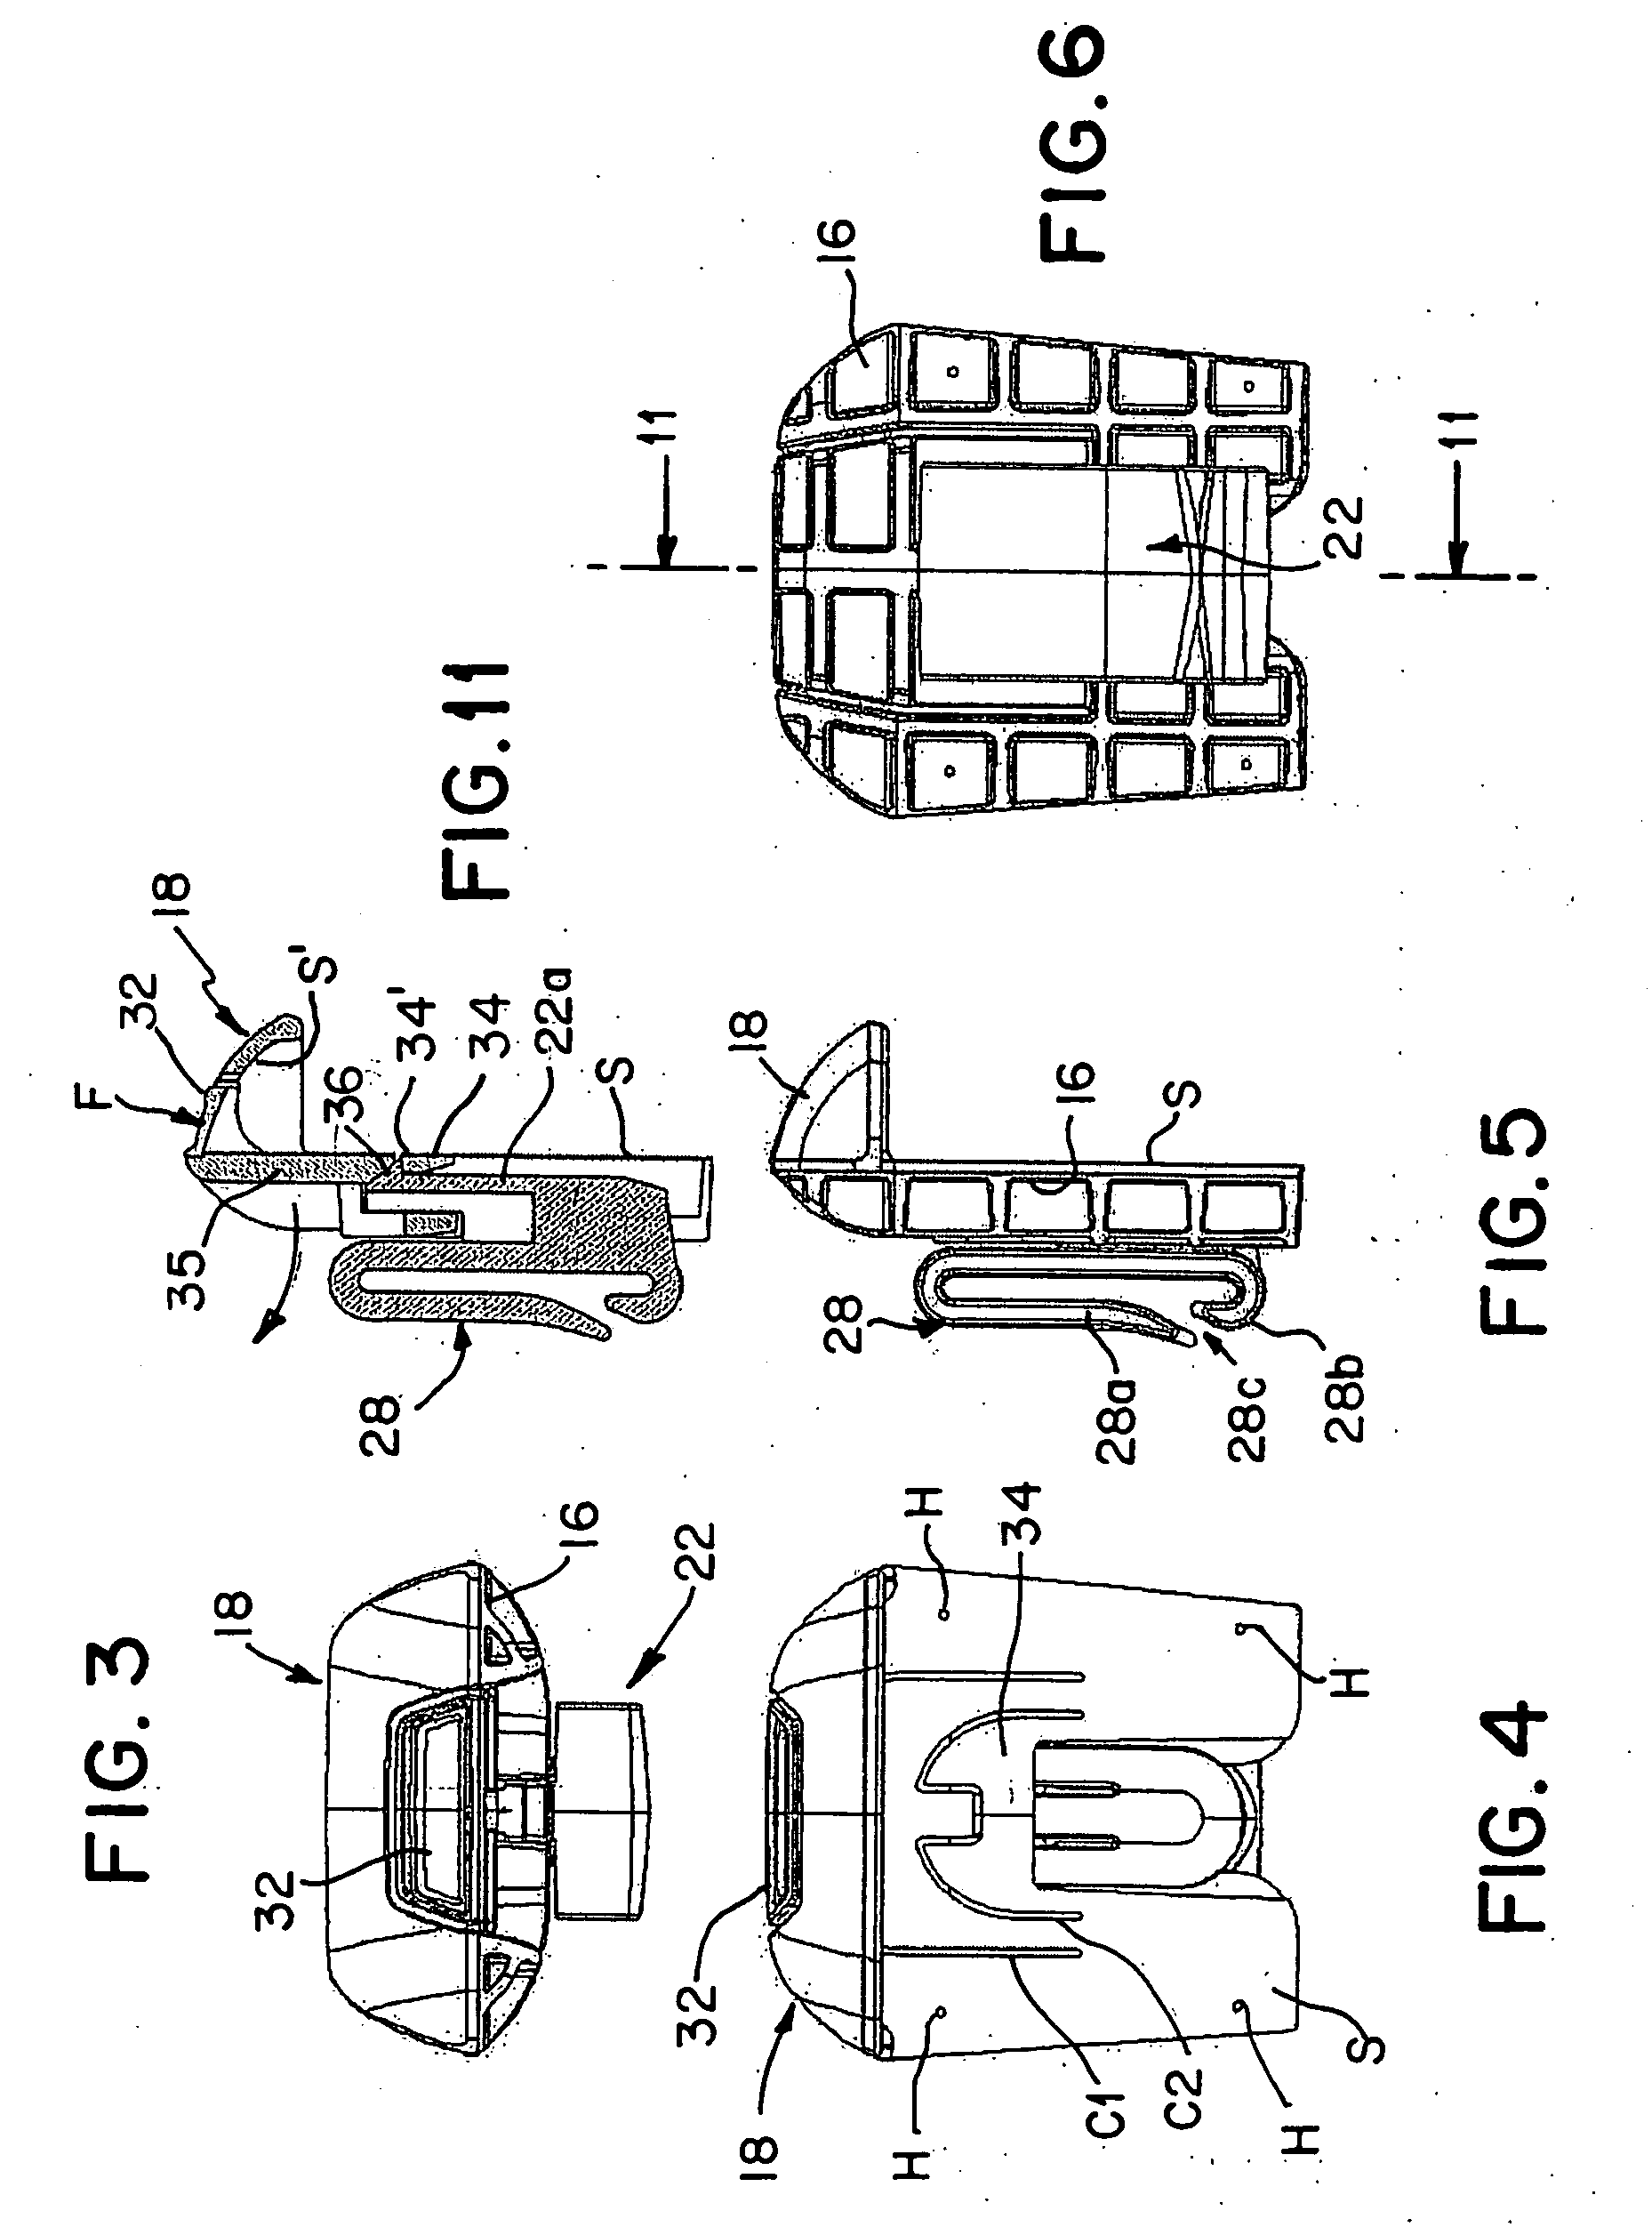 Retainer for detachably attaching an accessory to a utility belt